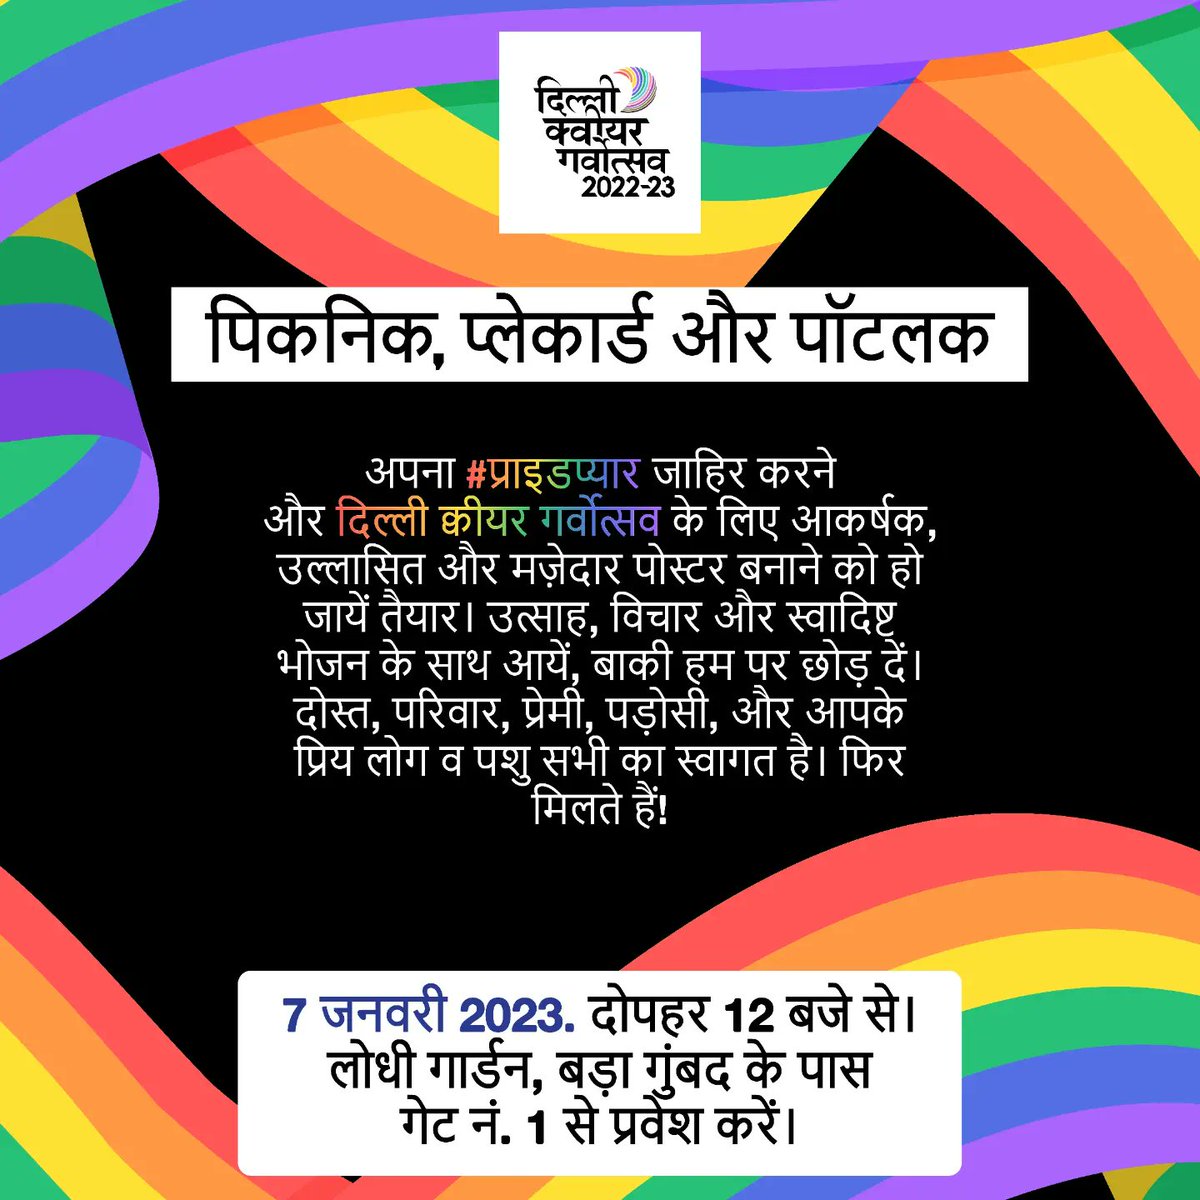 Delhi Queer Pride Placard Making and Potluck Picnic 12:00 (Noon) January 07, 2023 Lodhi Gardens, Near Bada Gumbad Entry Gate No. 1